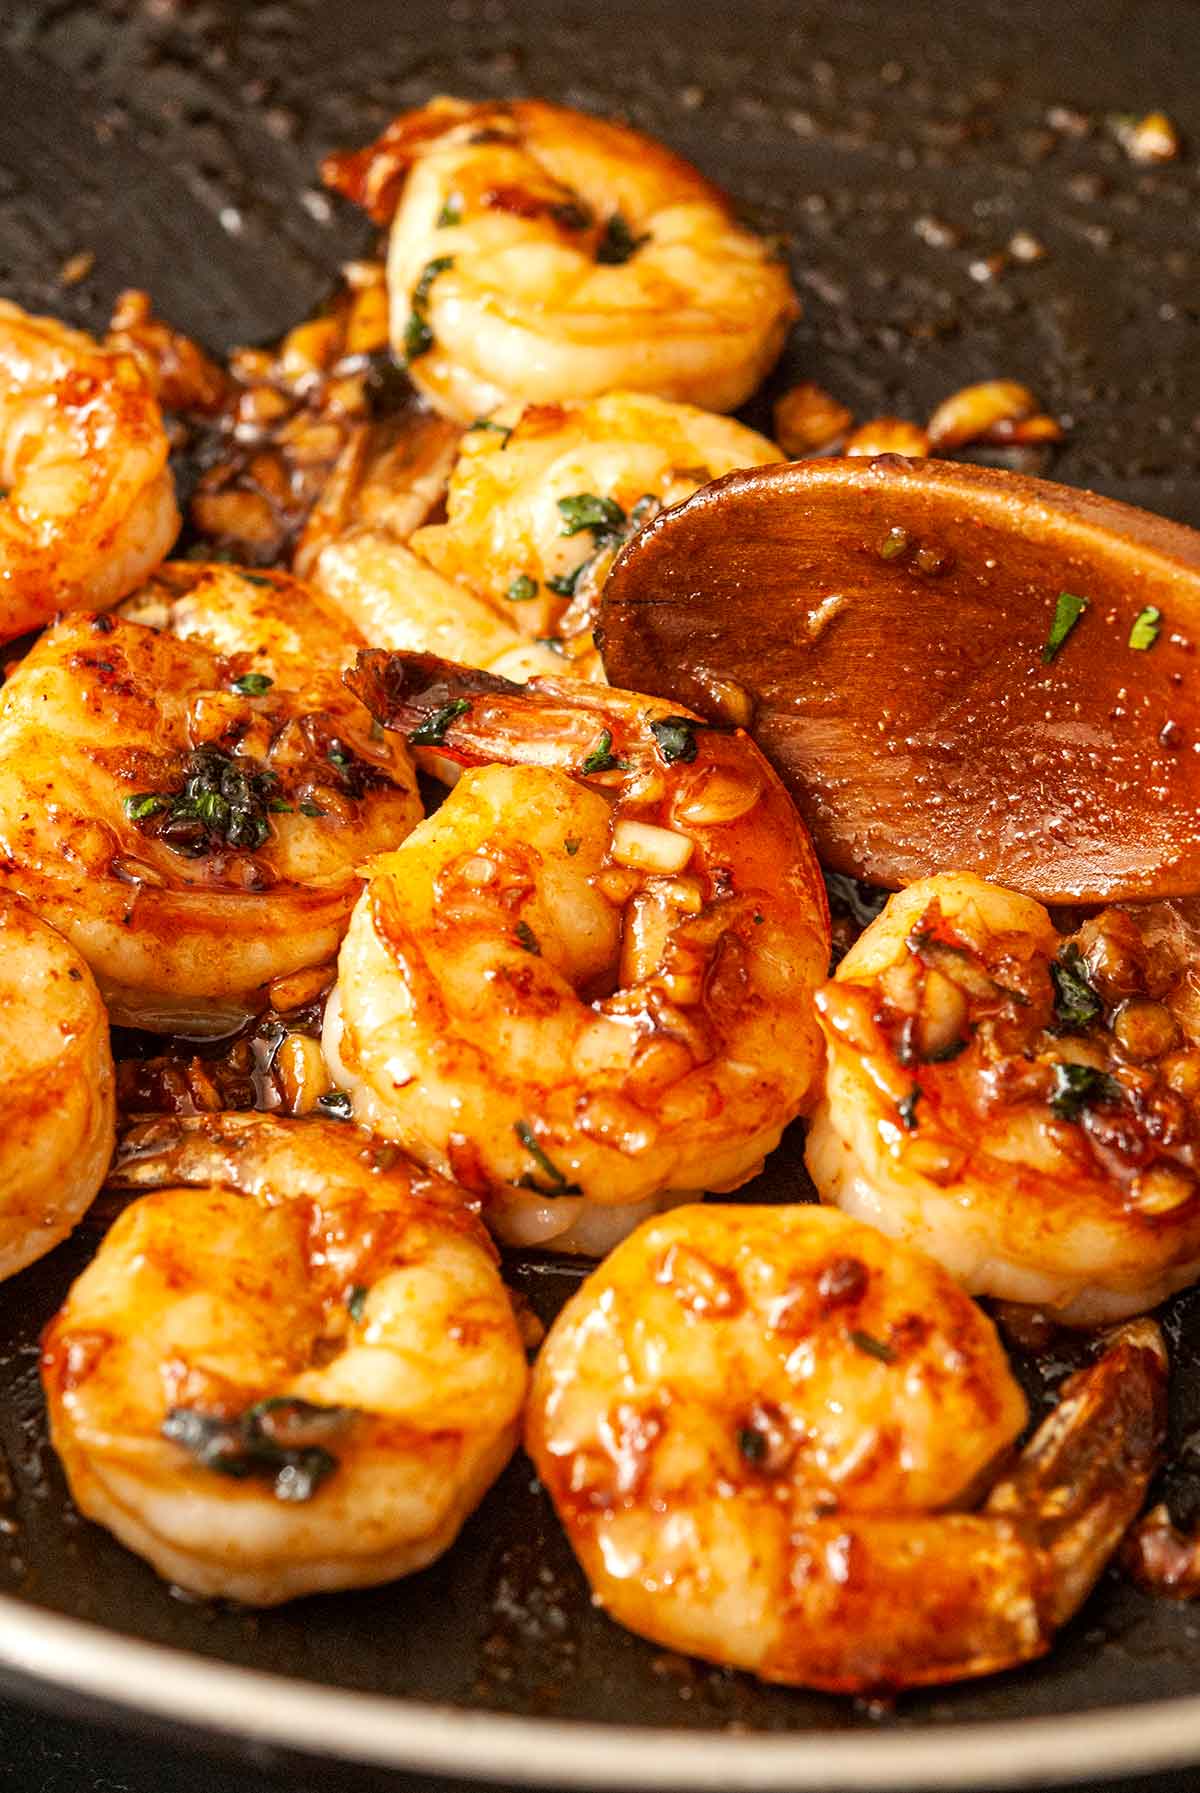 12 cooked shrimp in a pan with a wooden spoon.